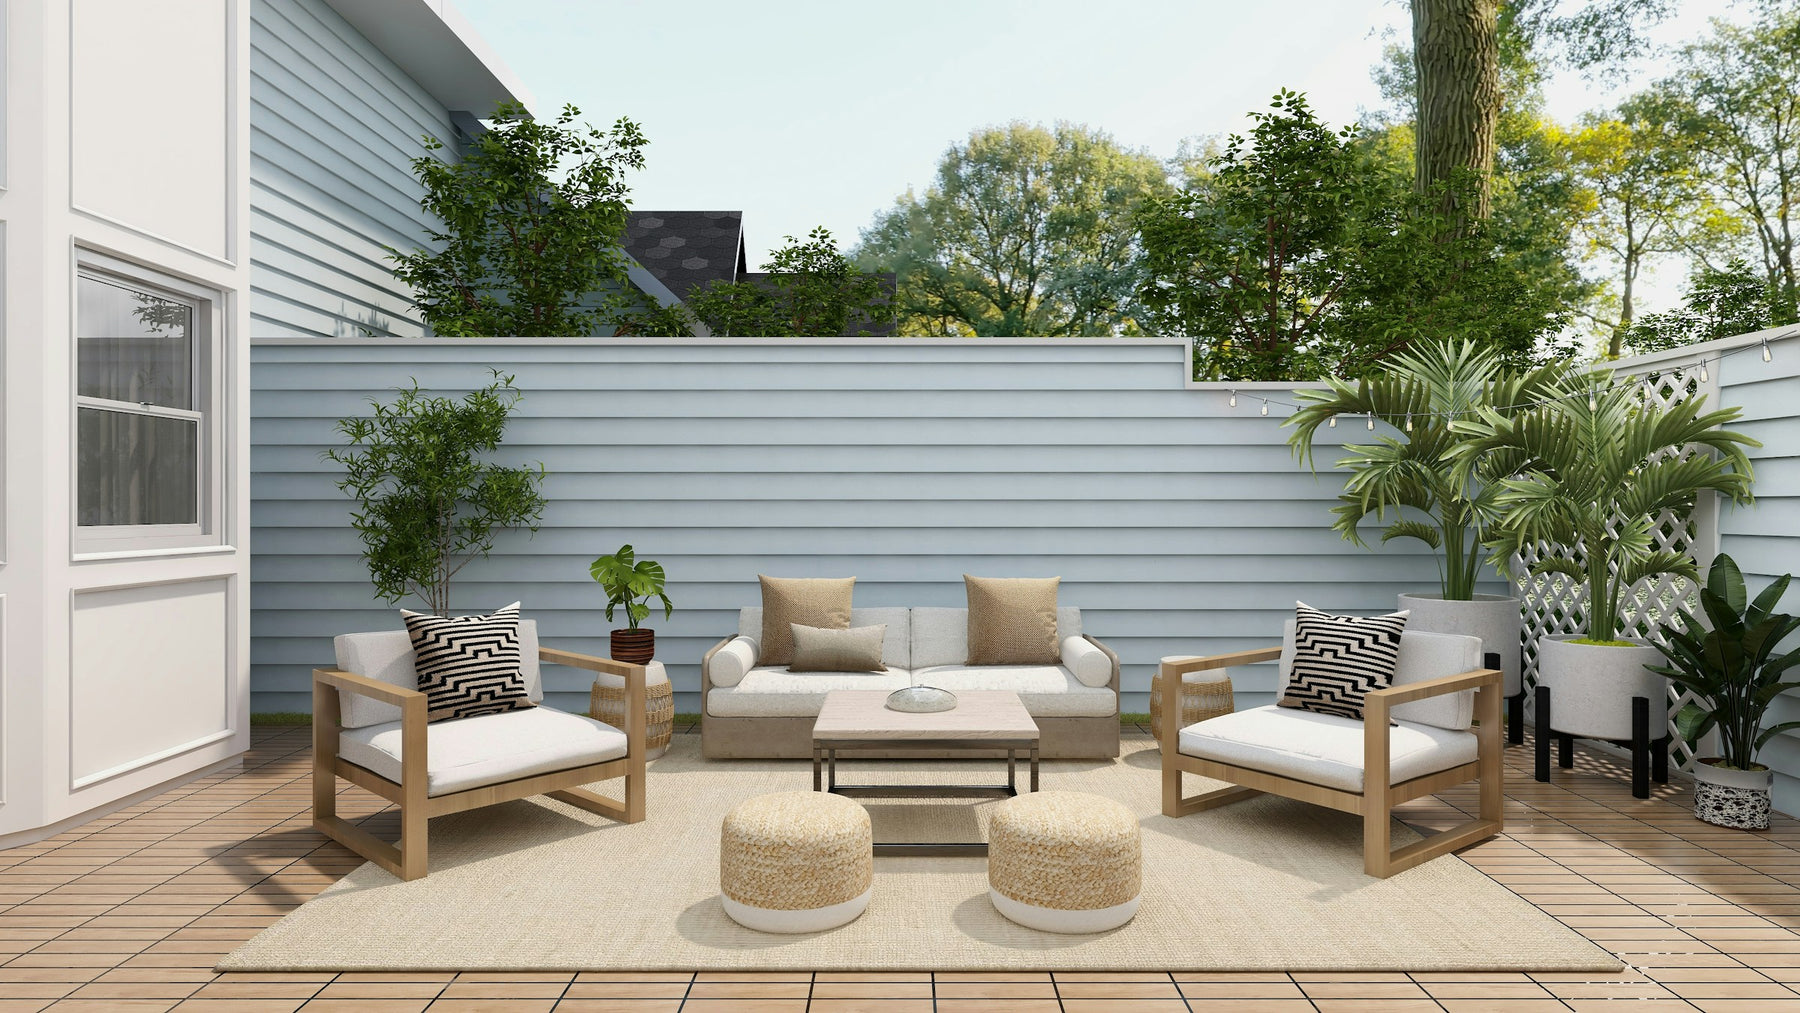 Bask in the Sunshine: Must-Have Outdoor Furniture for Summer Soirees